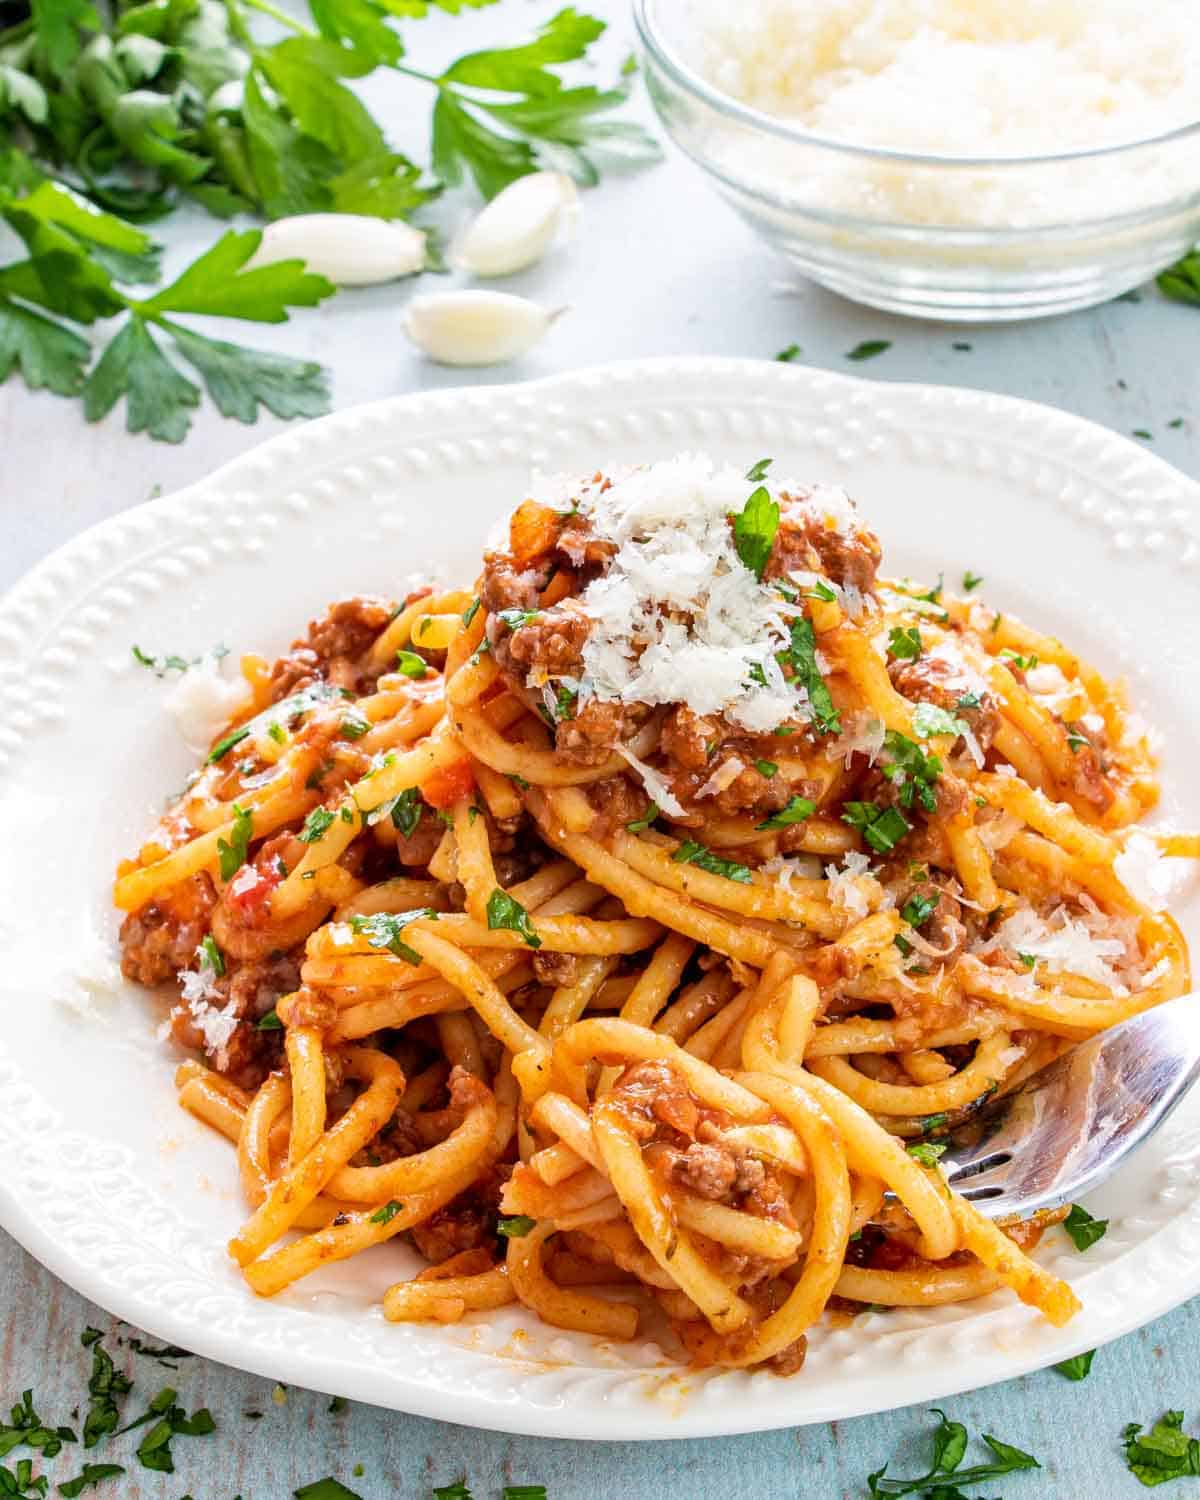 meat spaghetti on a white plate garnished with parsley.